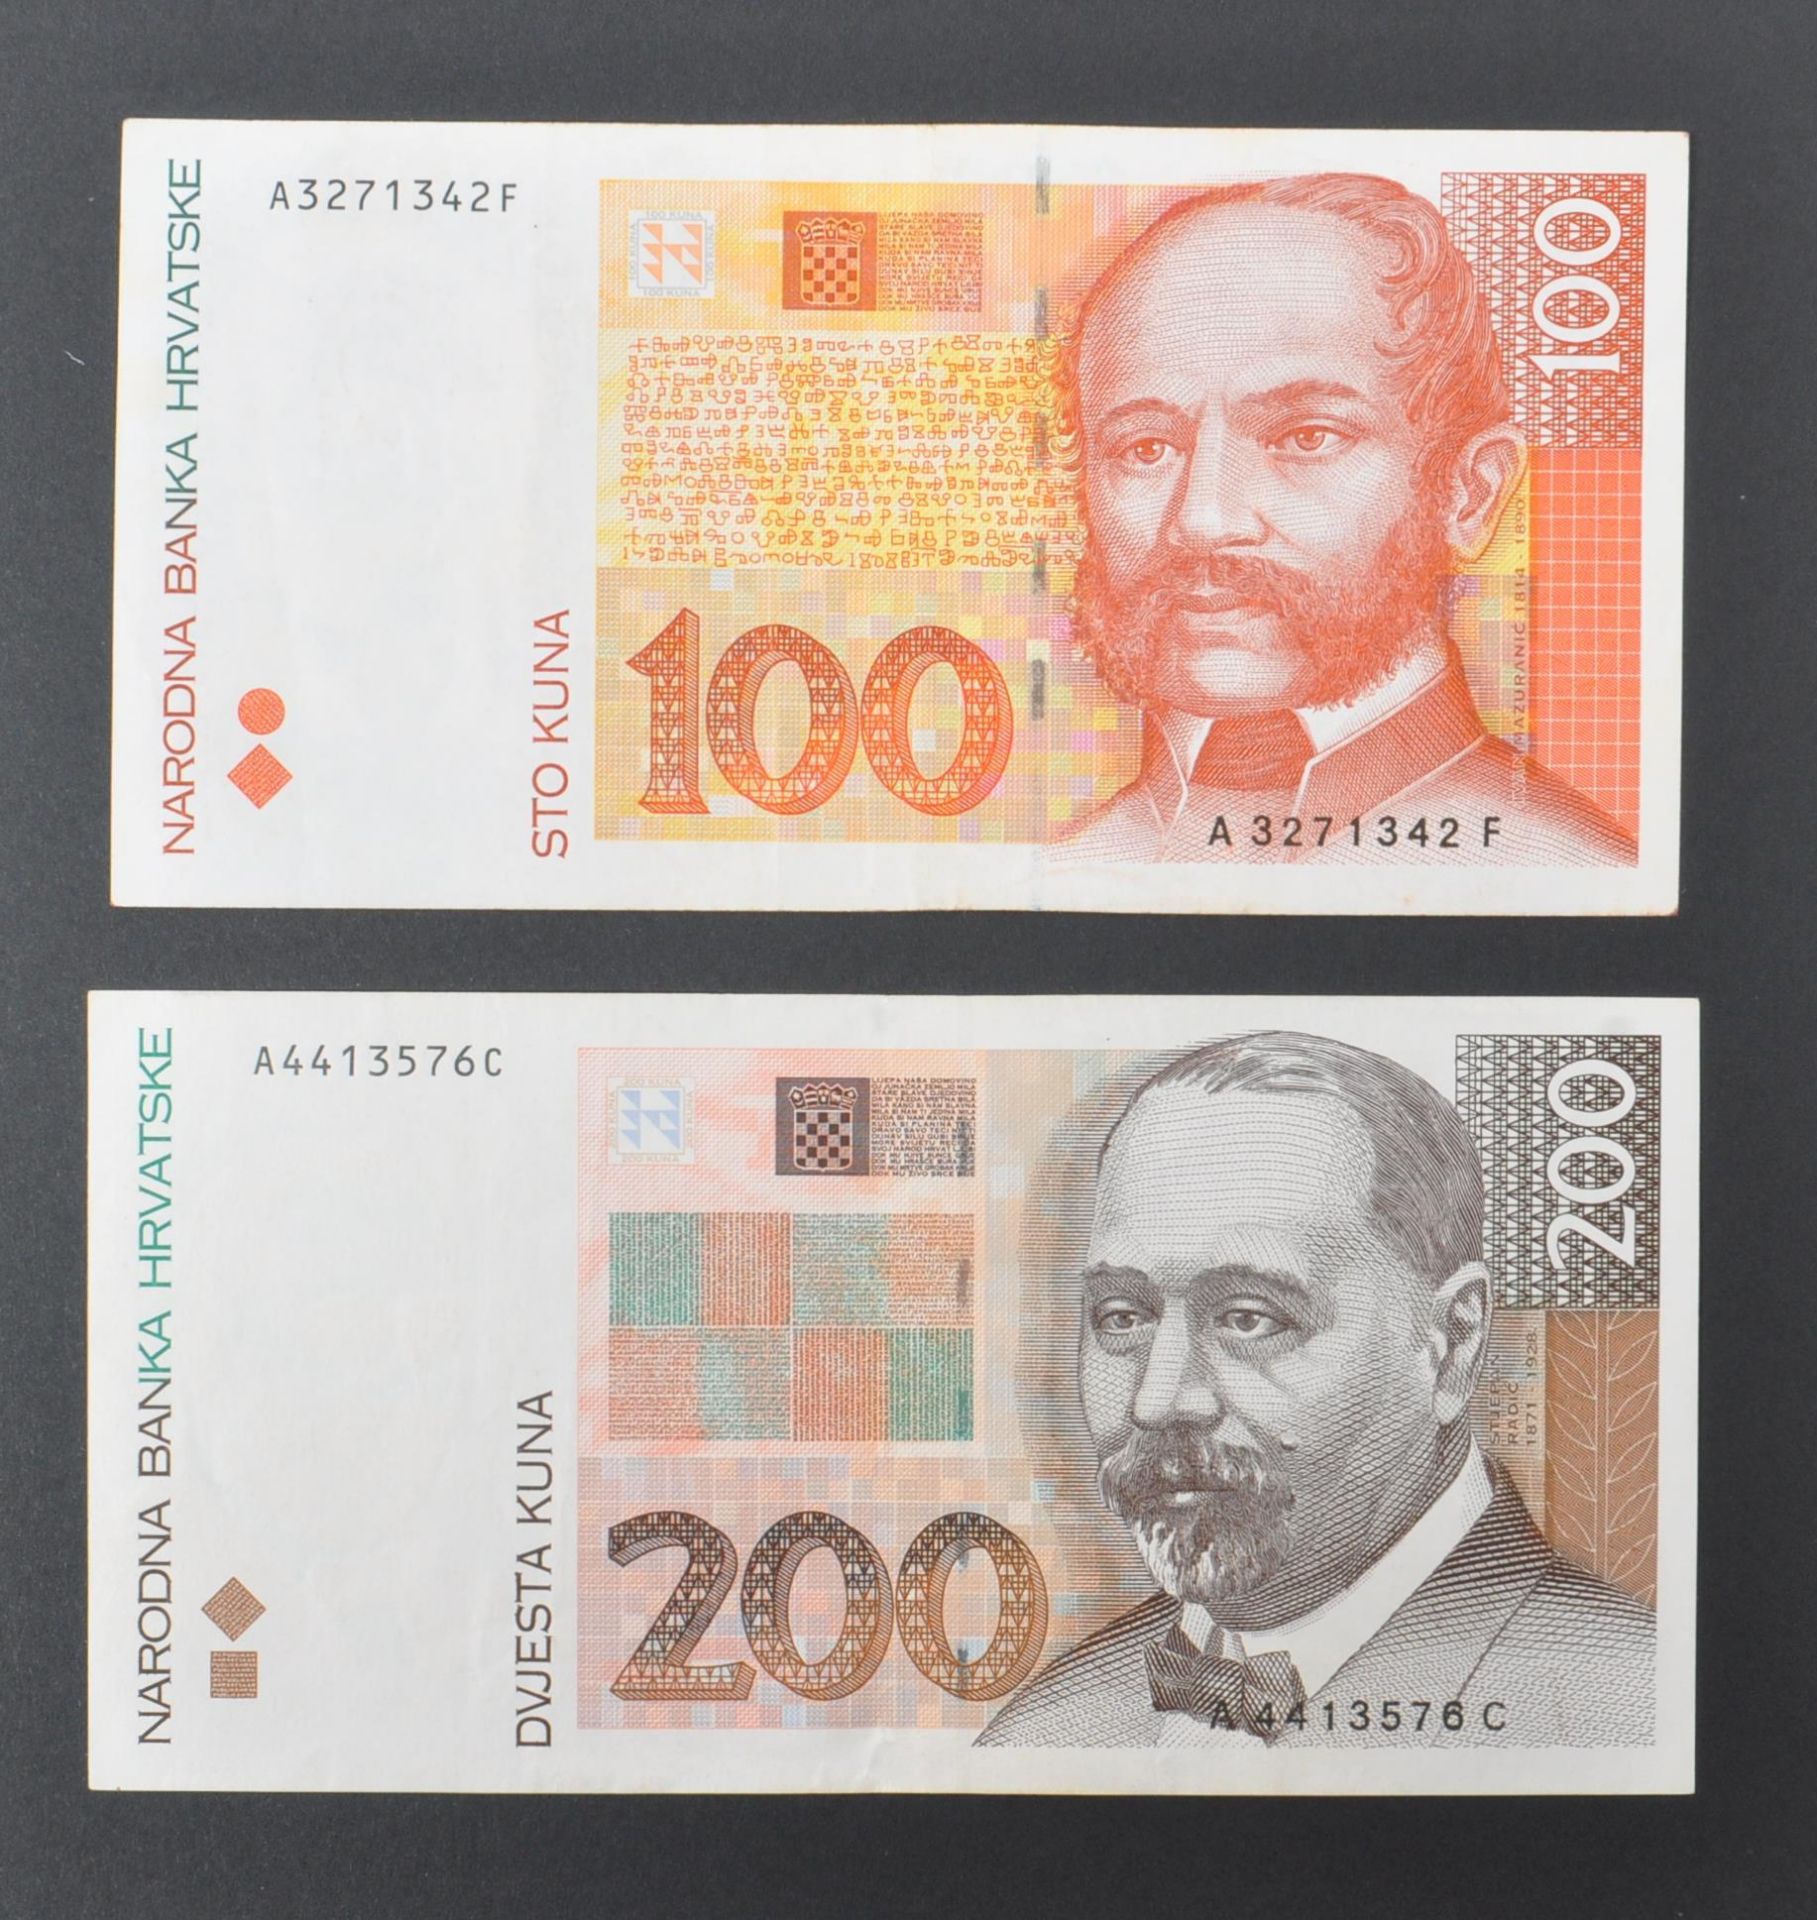 INTERNATIONAL MOSTLY UNCIRCULATED BANK NOTES - EUROPE - Image 19 of 30